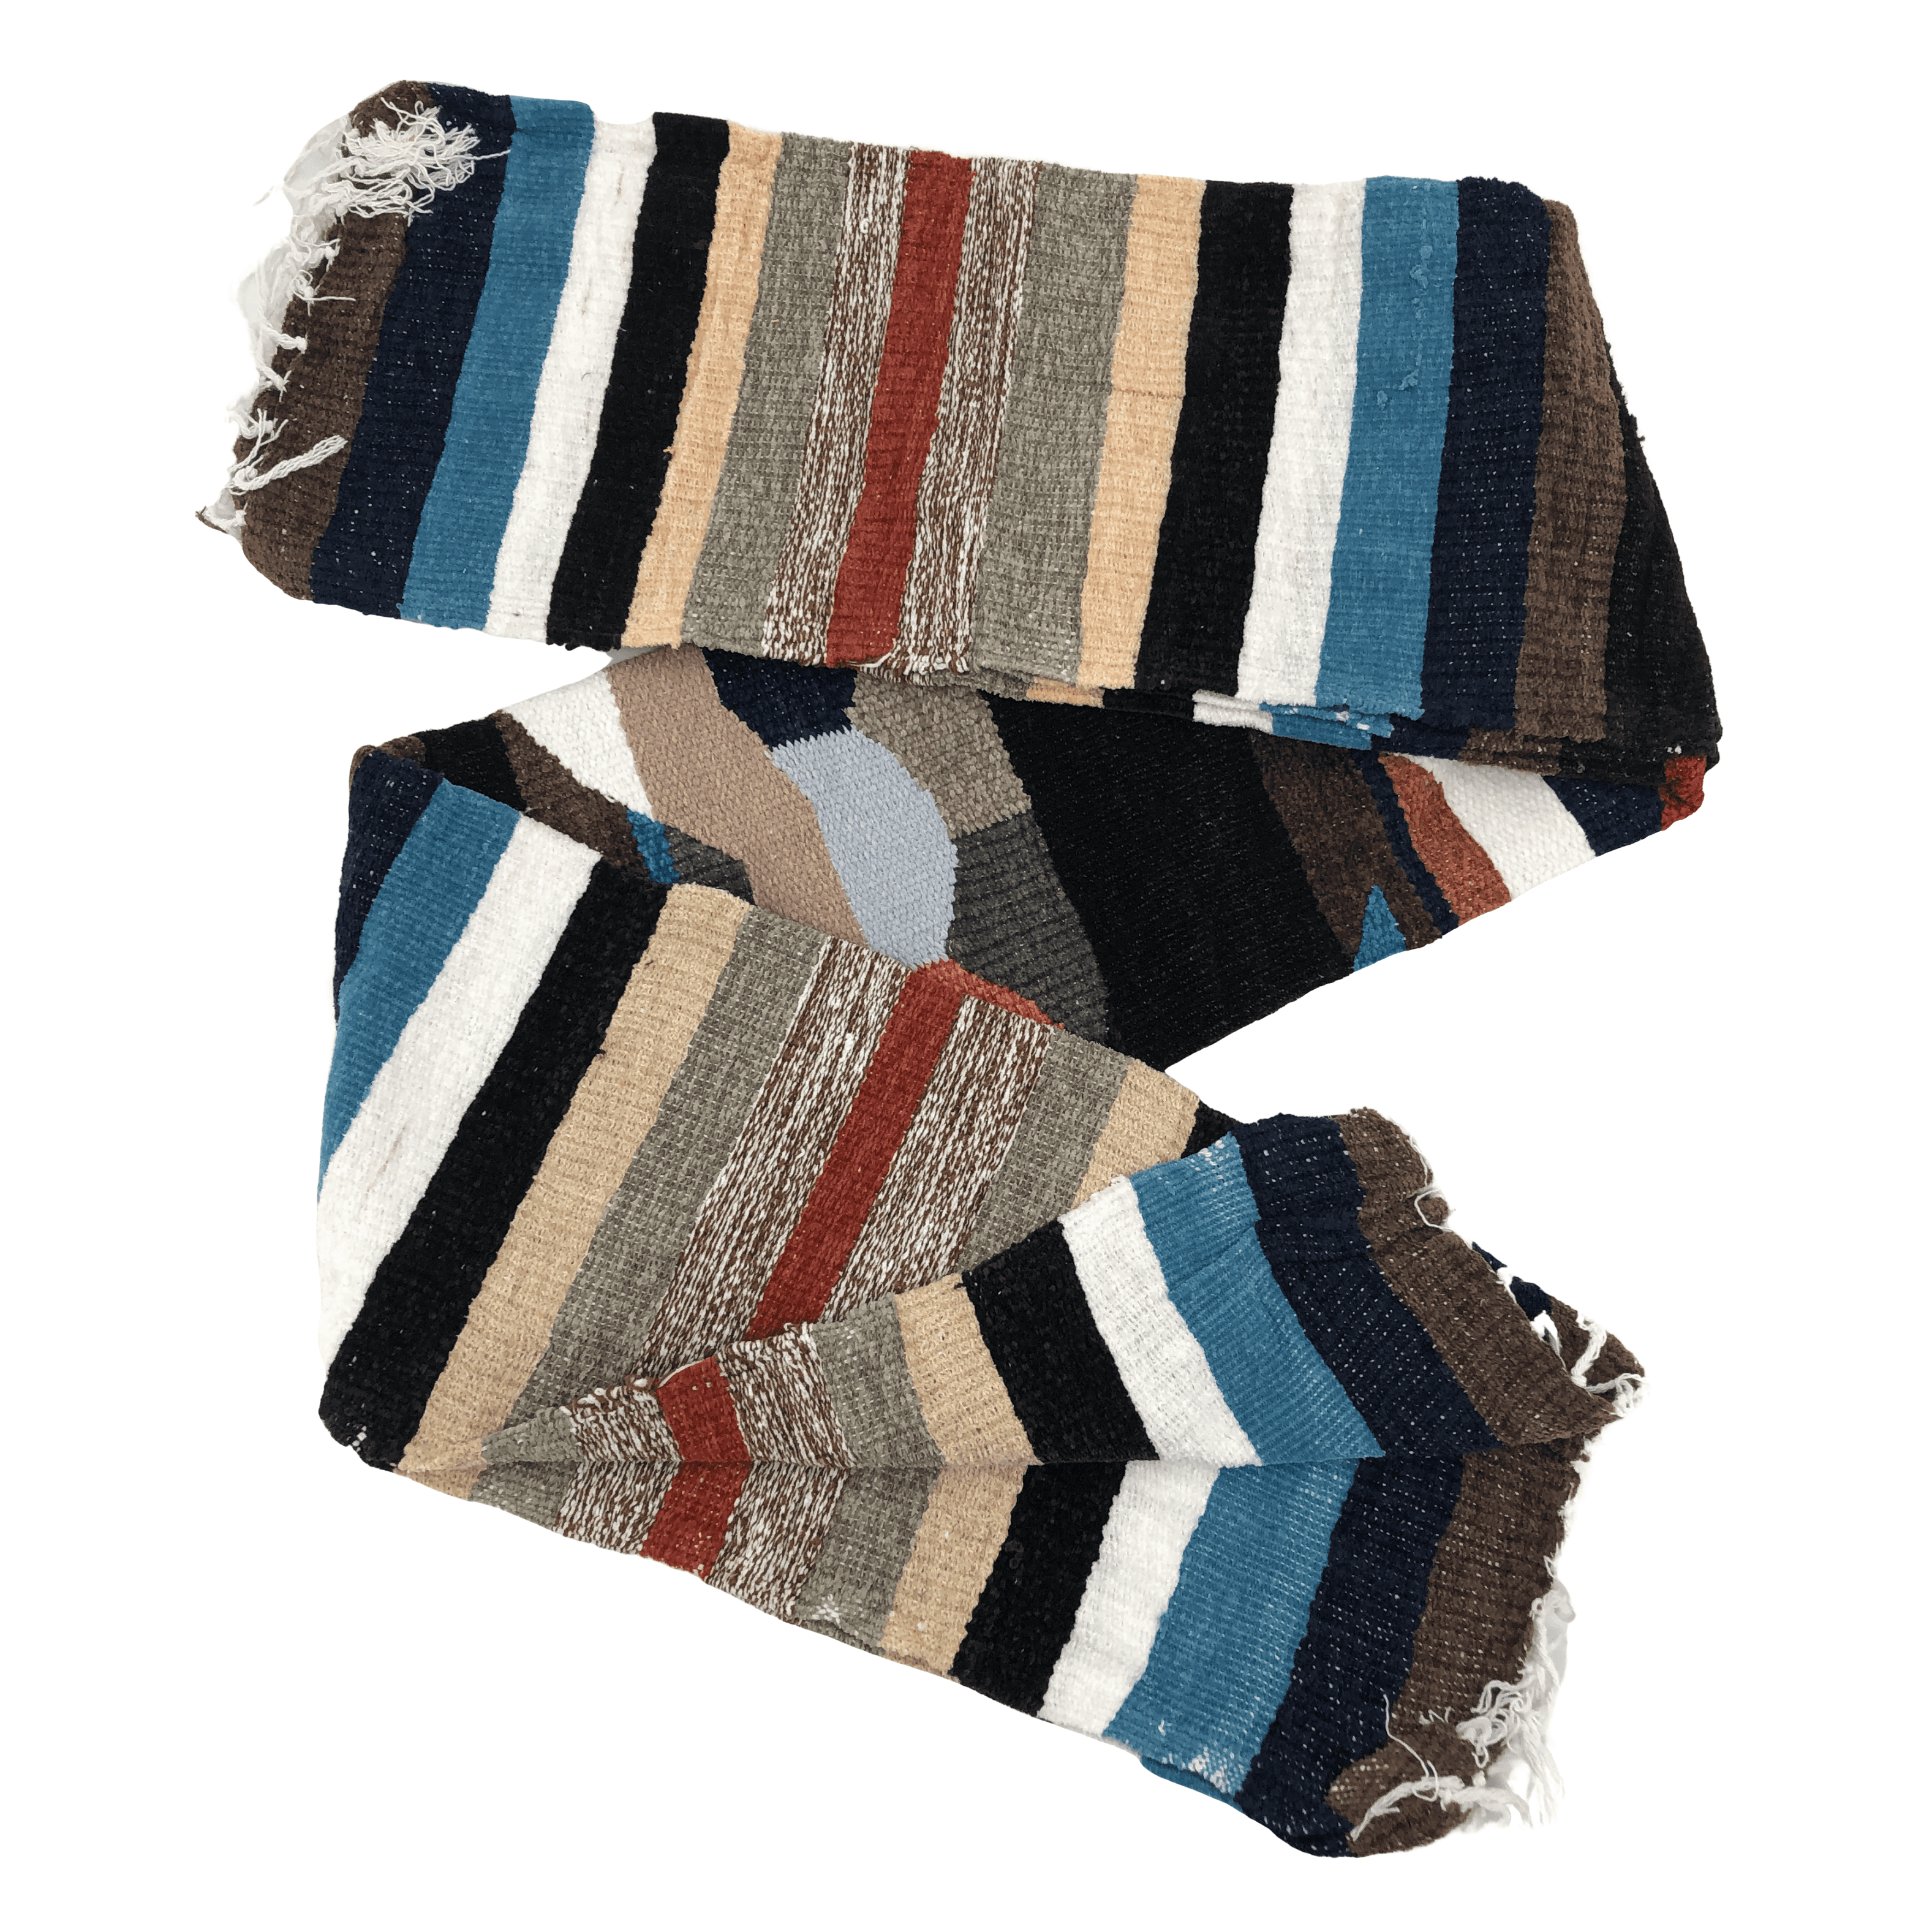 Oland Handwoven Blankets: 50" x 82" / Chenile / Mexican Style / Camping Blanket / Multi-Coloured